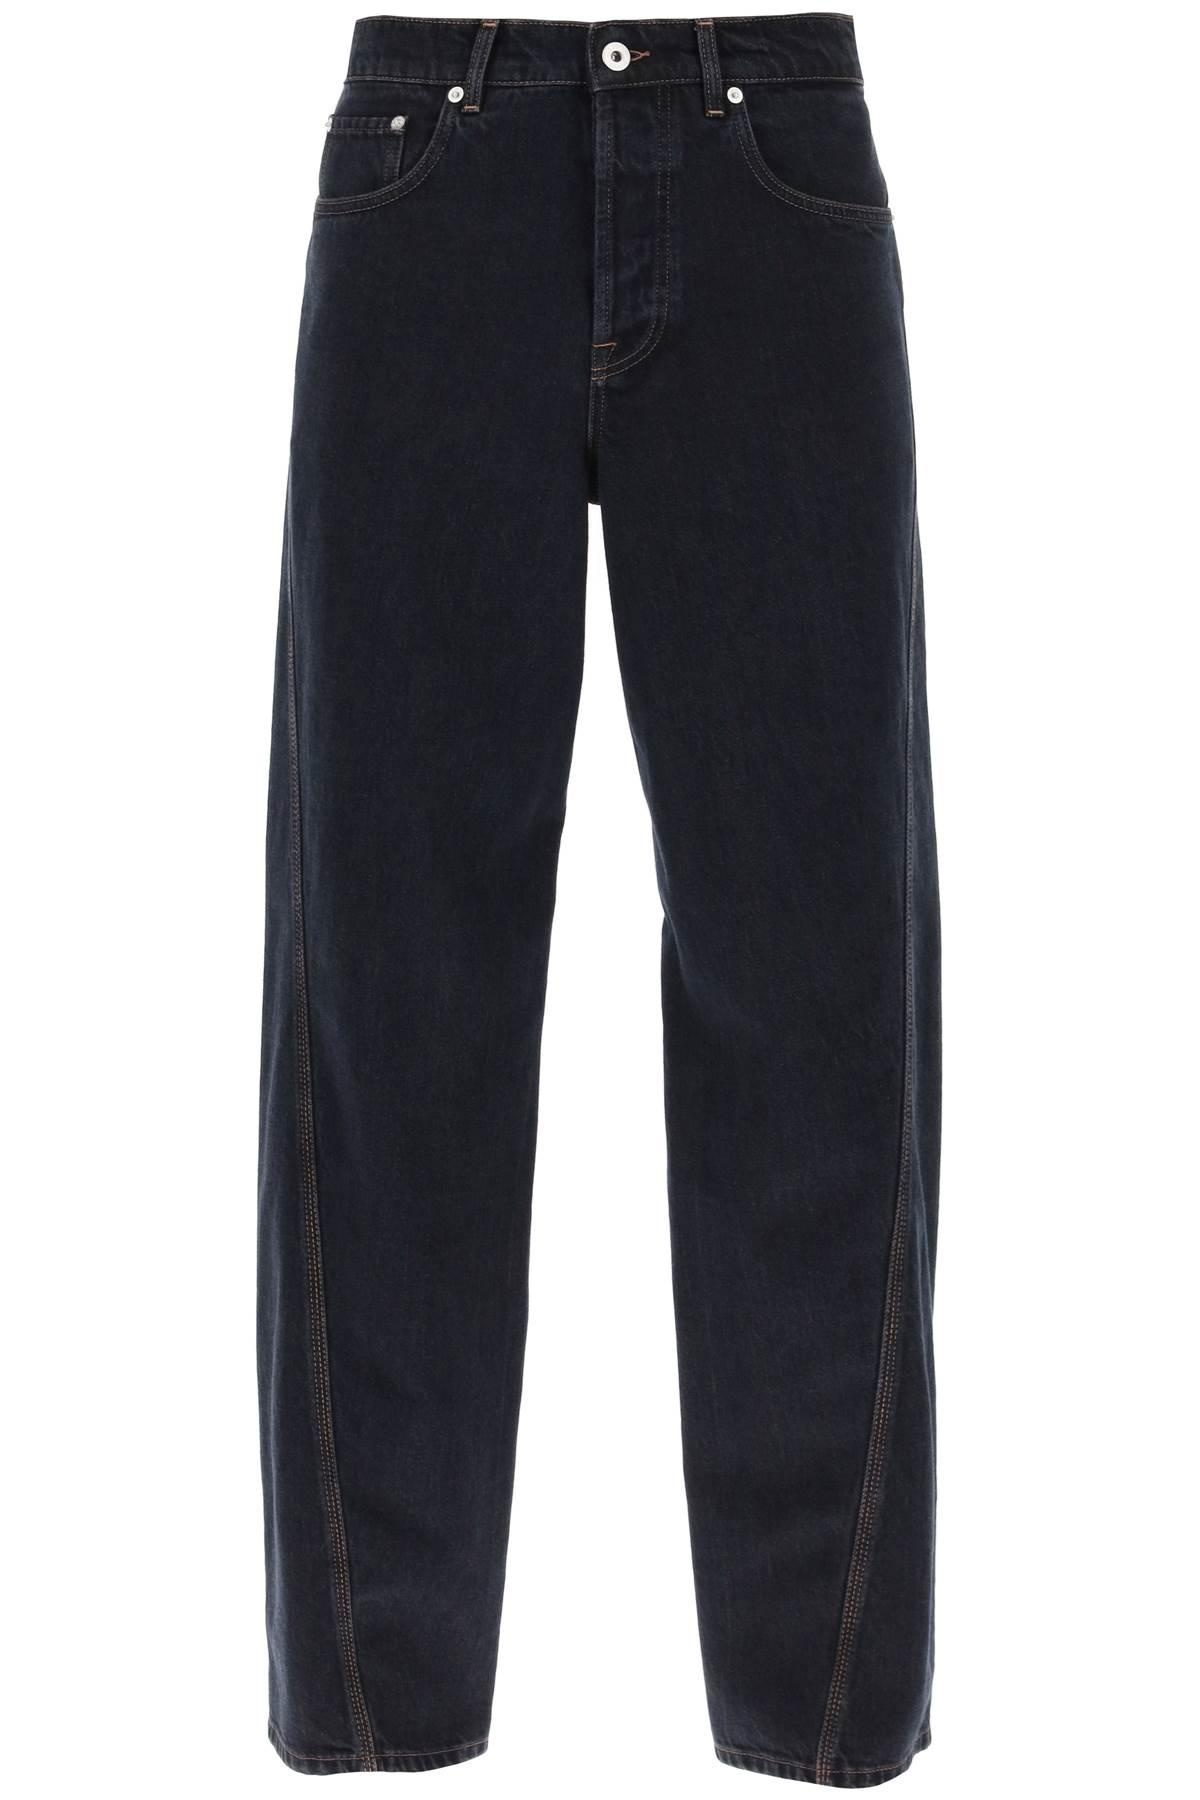 Lanvin Baggy Jeans With Twisted Seams - 1